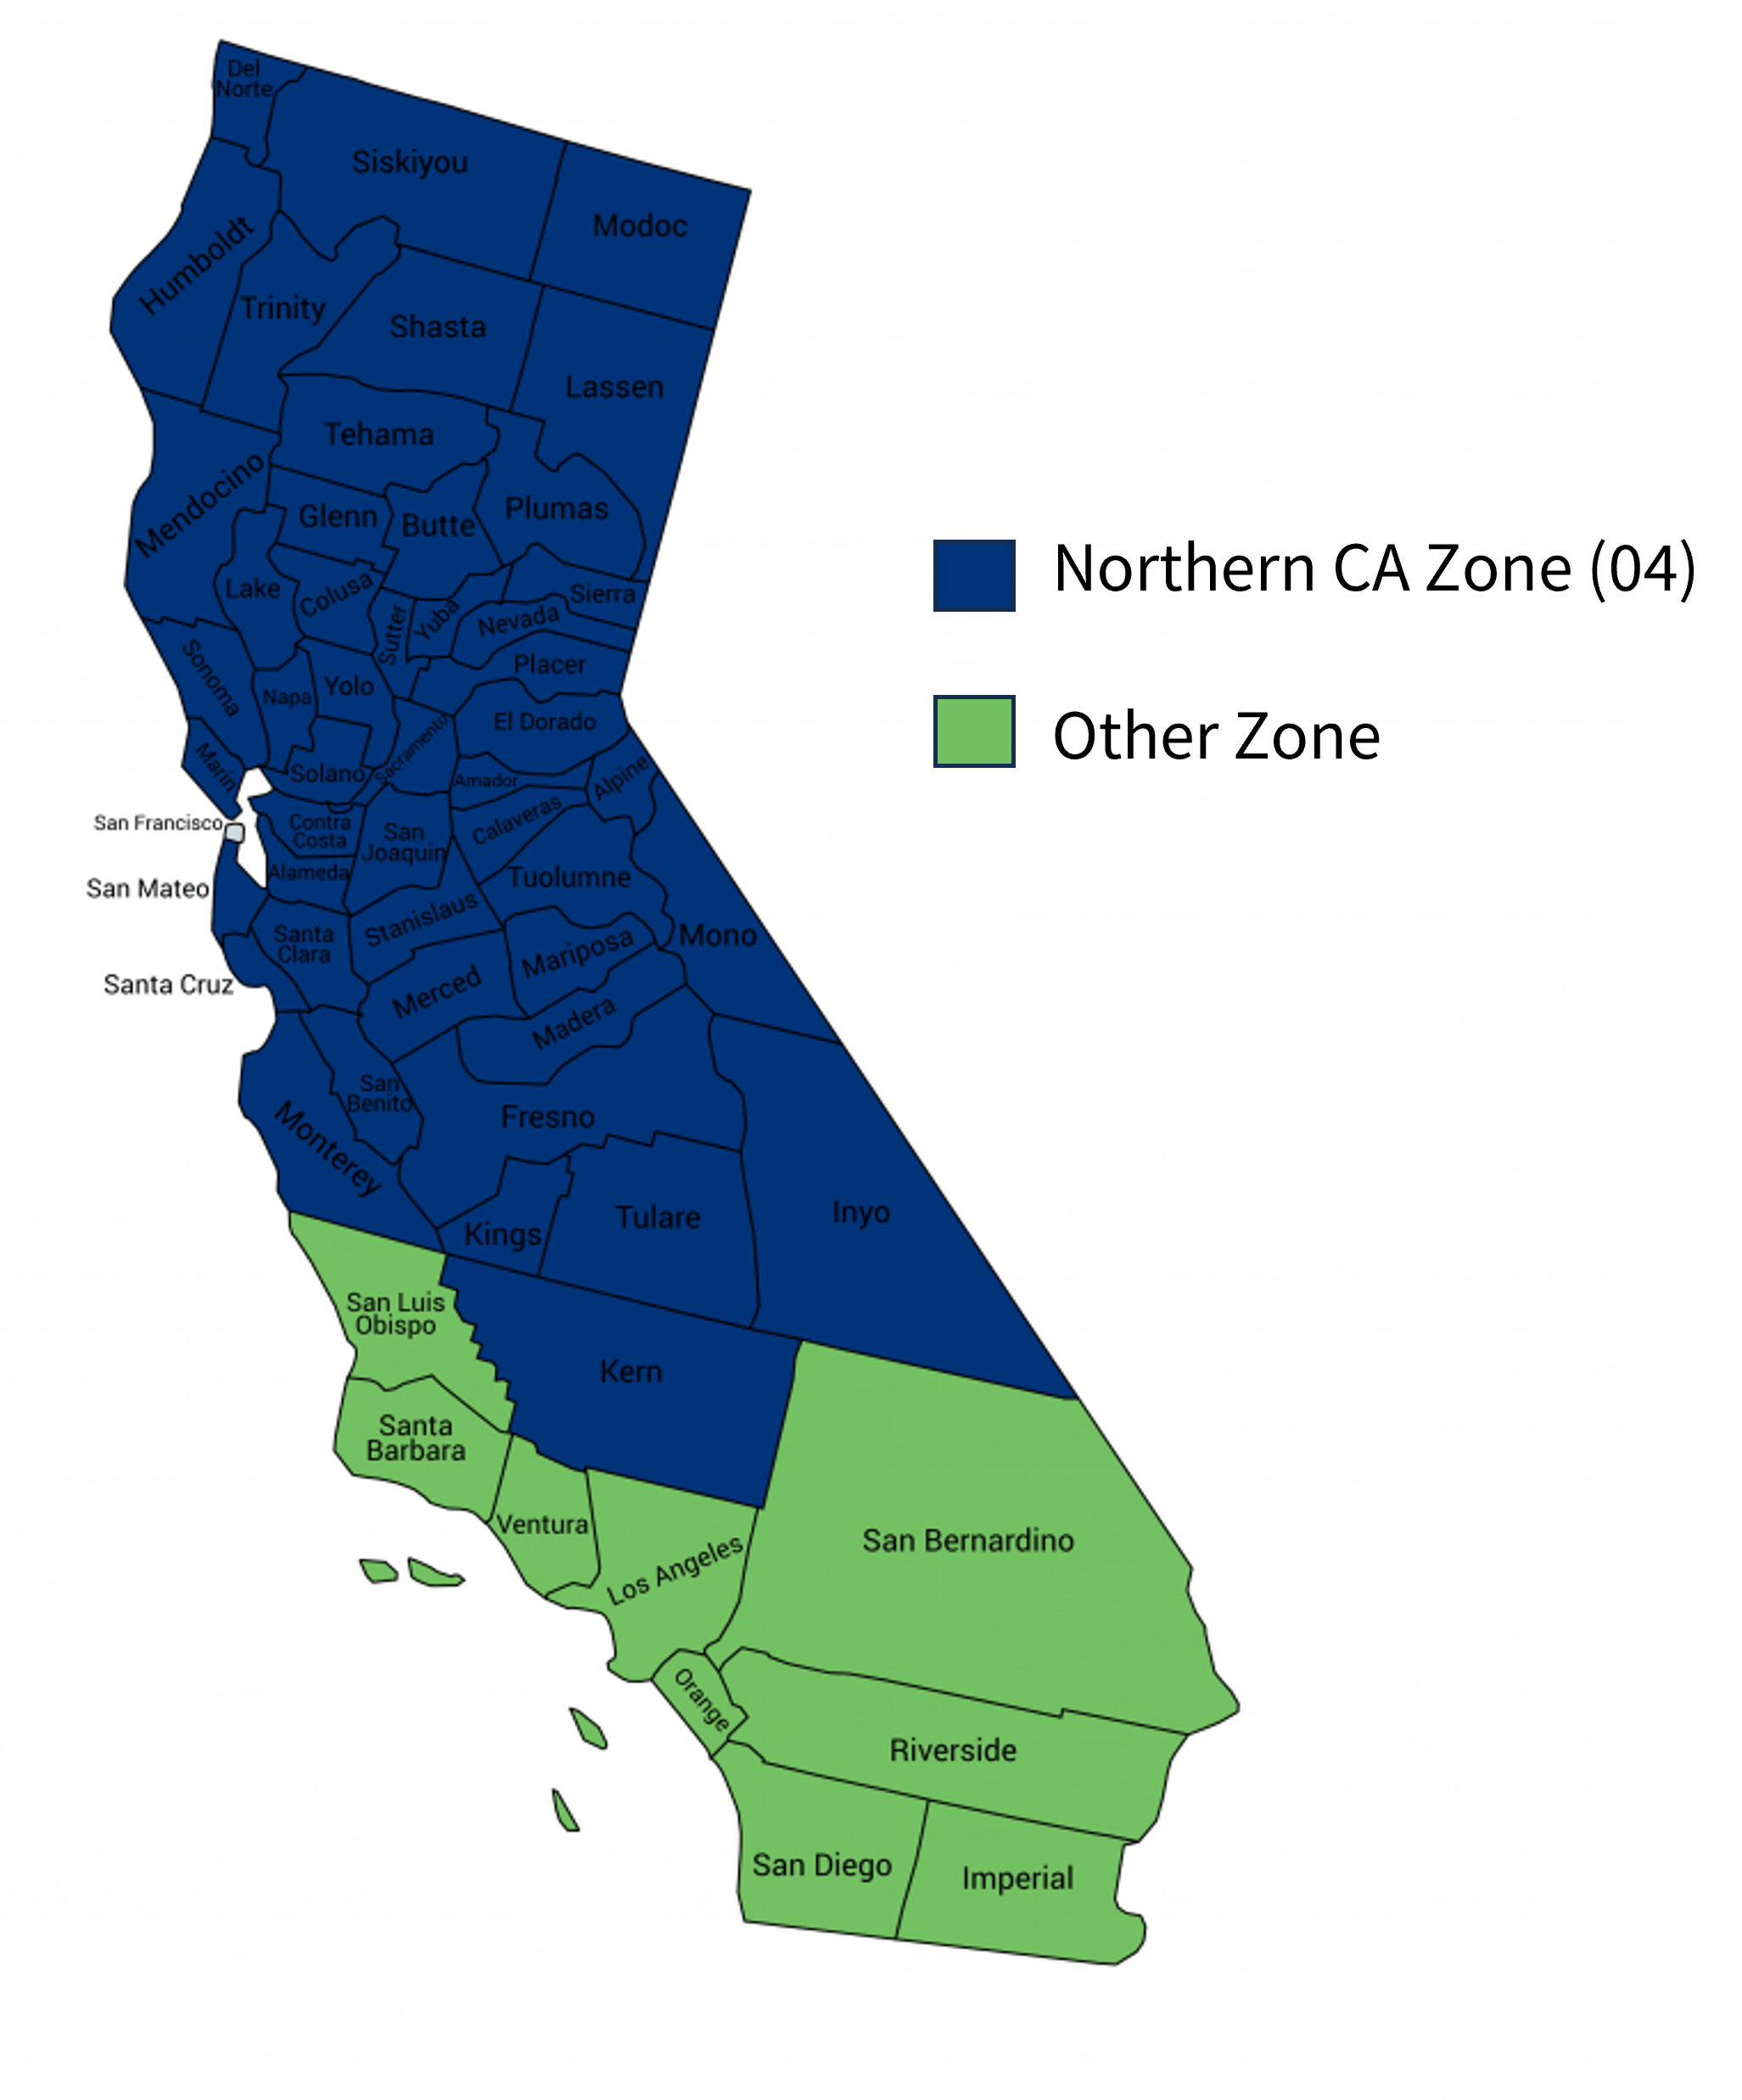 Northern California CFC Combined Federal Campaign